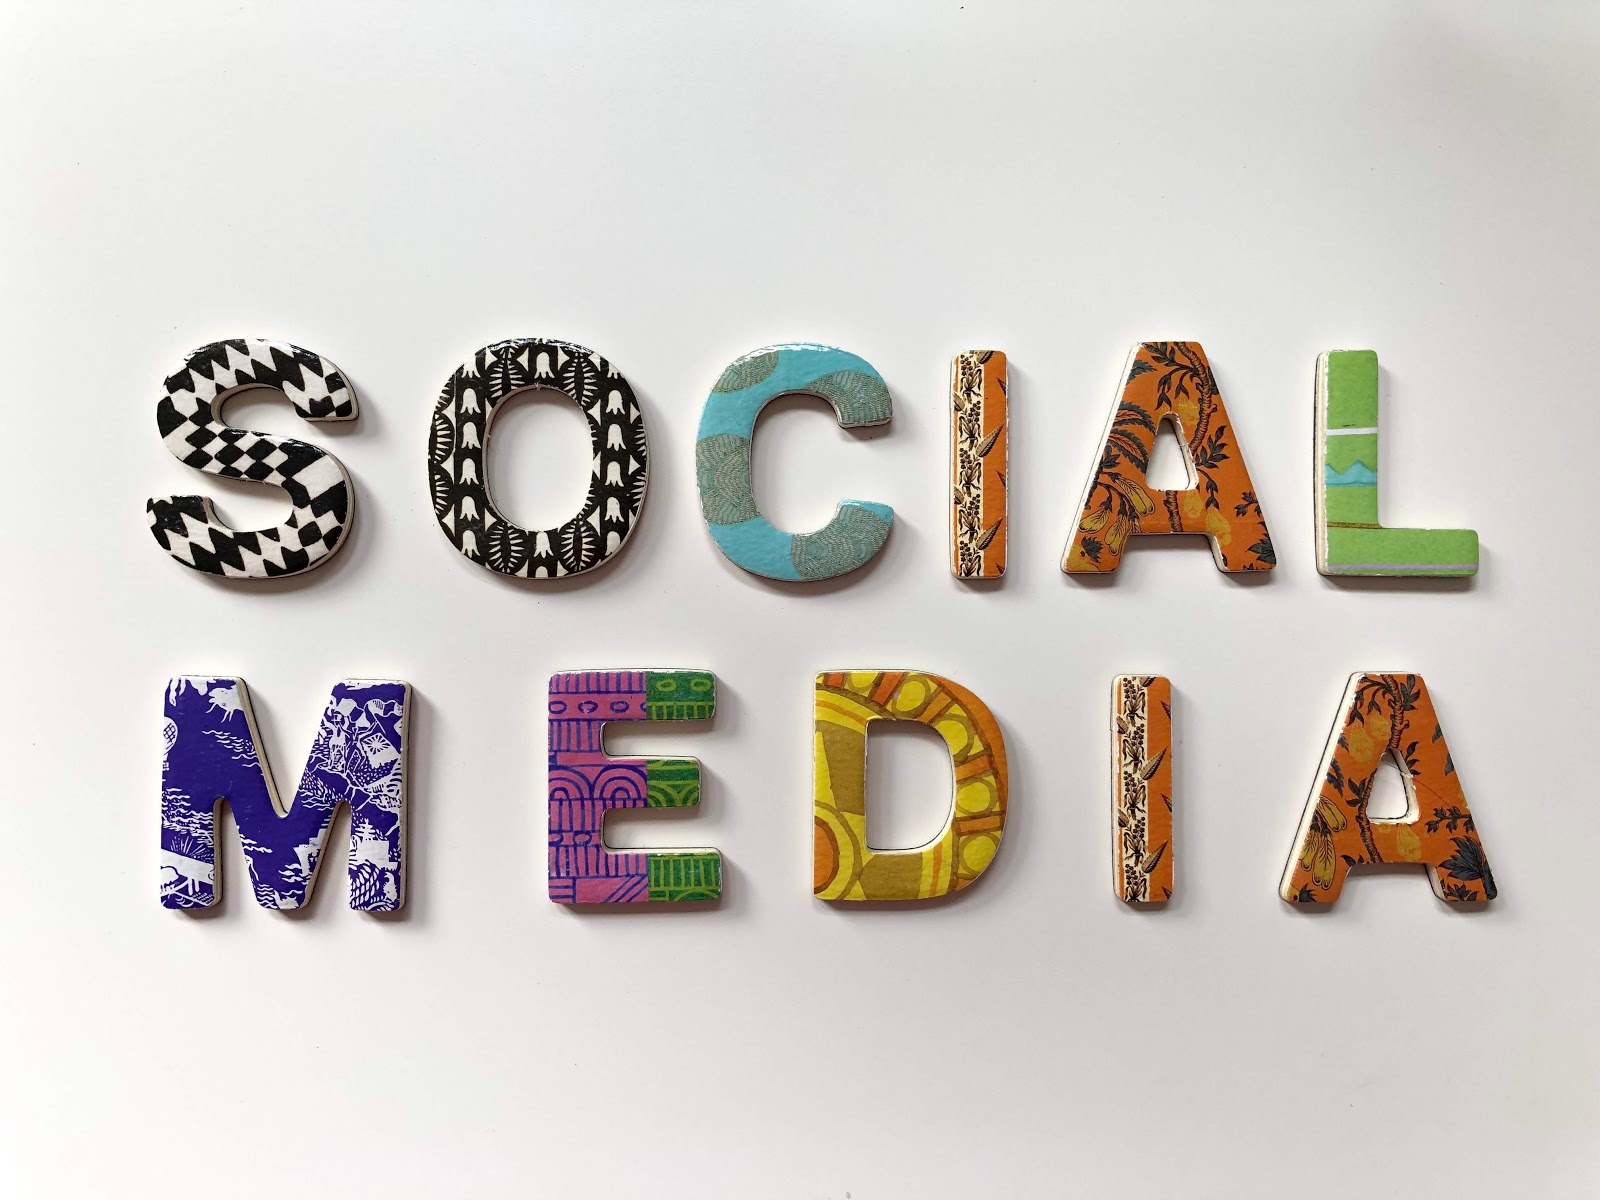 Three Social Media Trends You Need to Jump on in 2020